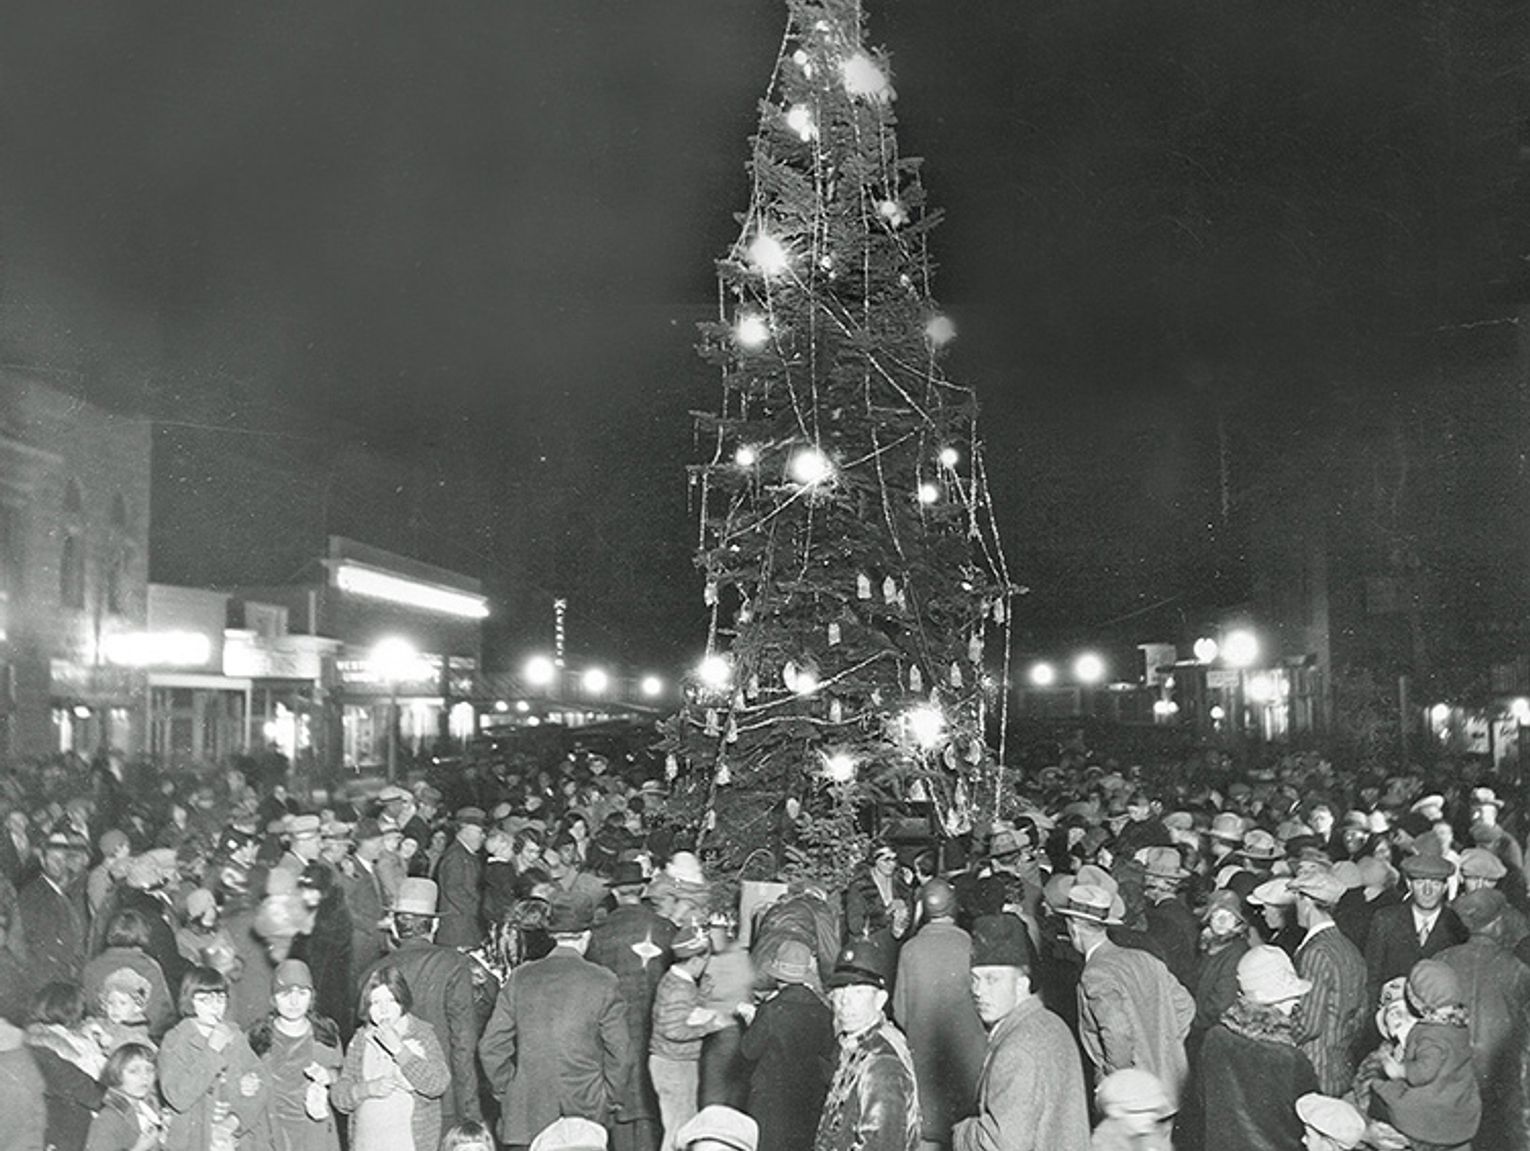 City of Fallon Tree Lighting The Social Event of the Year